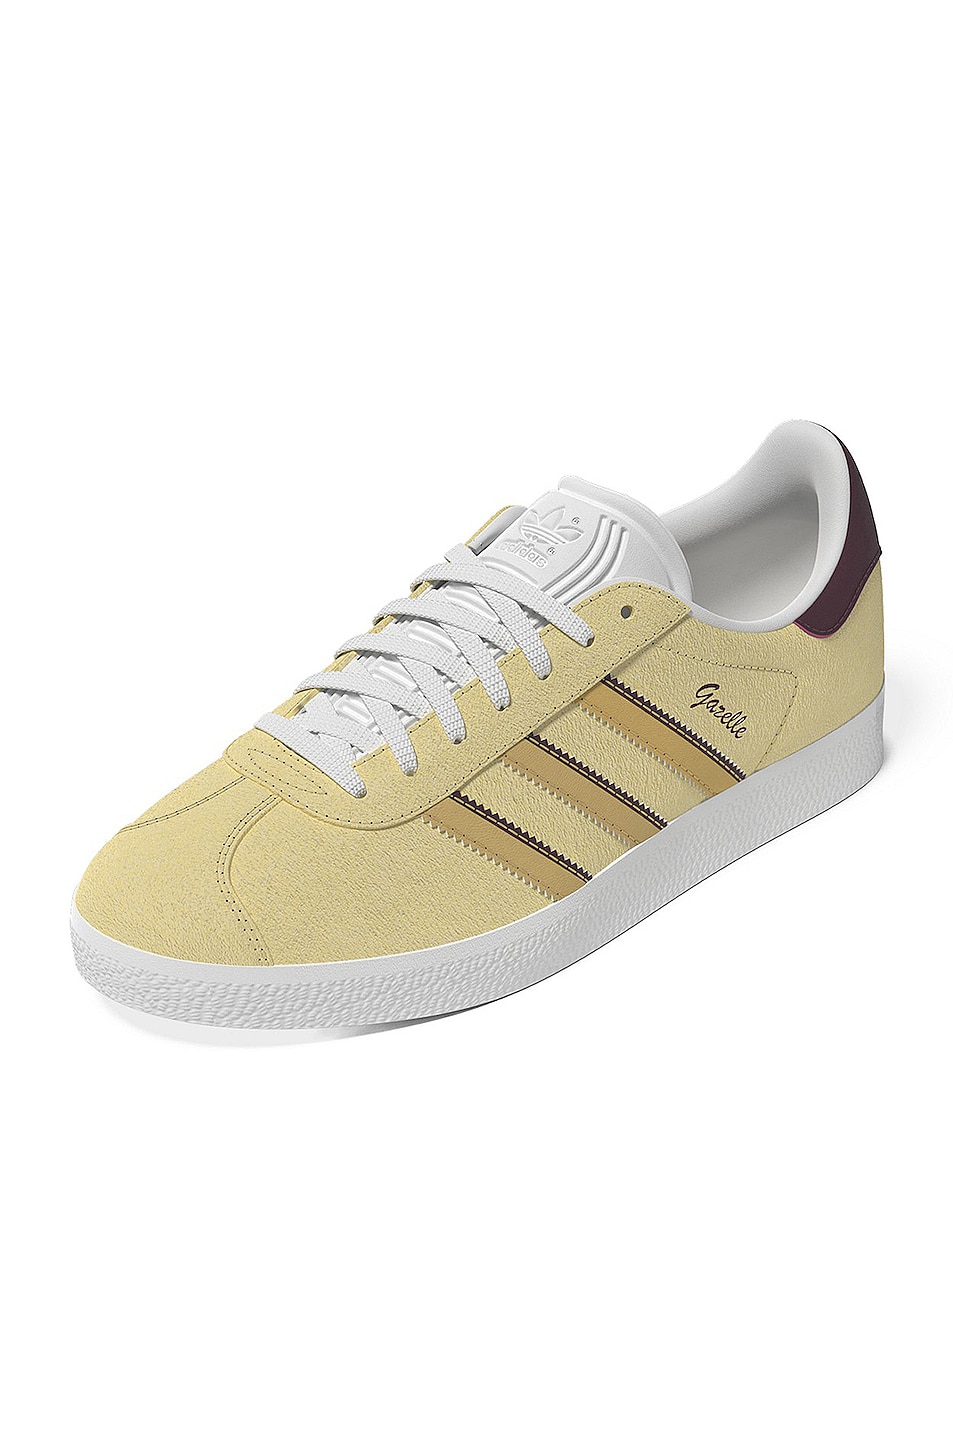 Shop Adidas Originals Gazelle In Almost Yellow  Oat  And Maroon